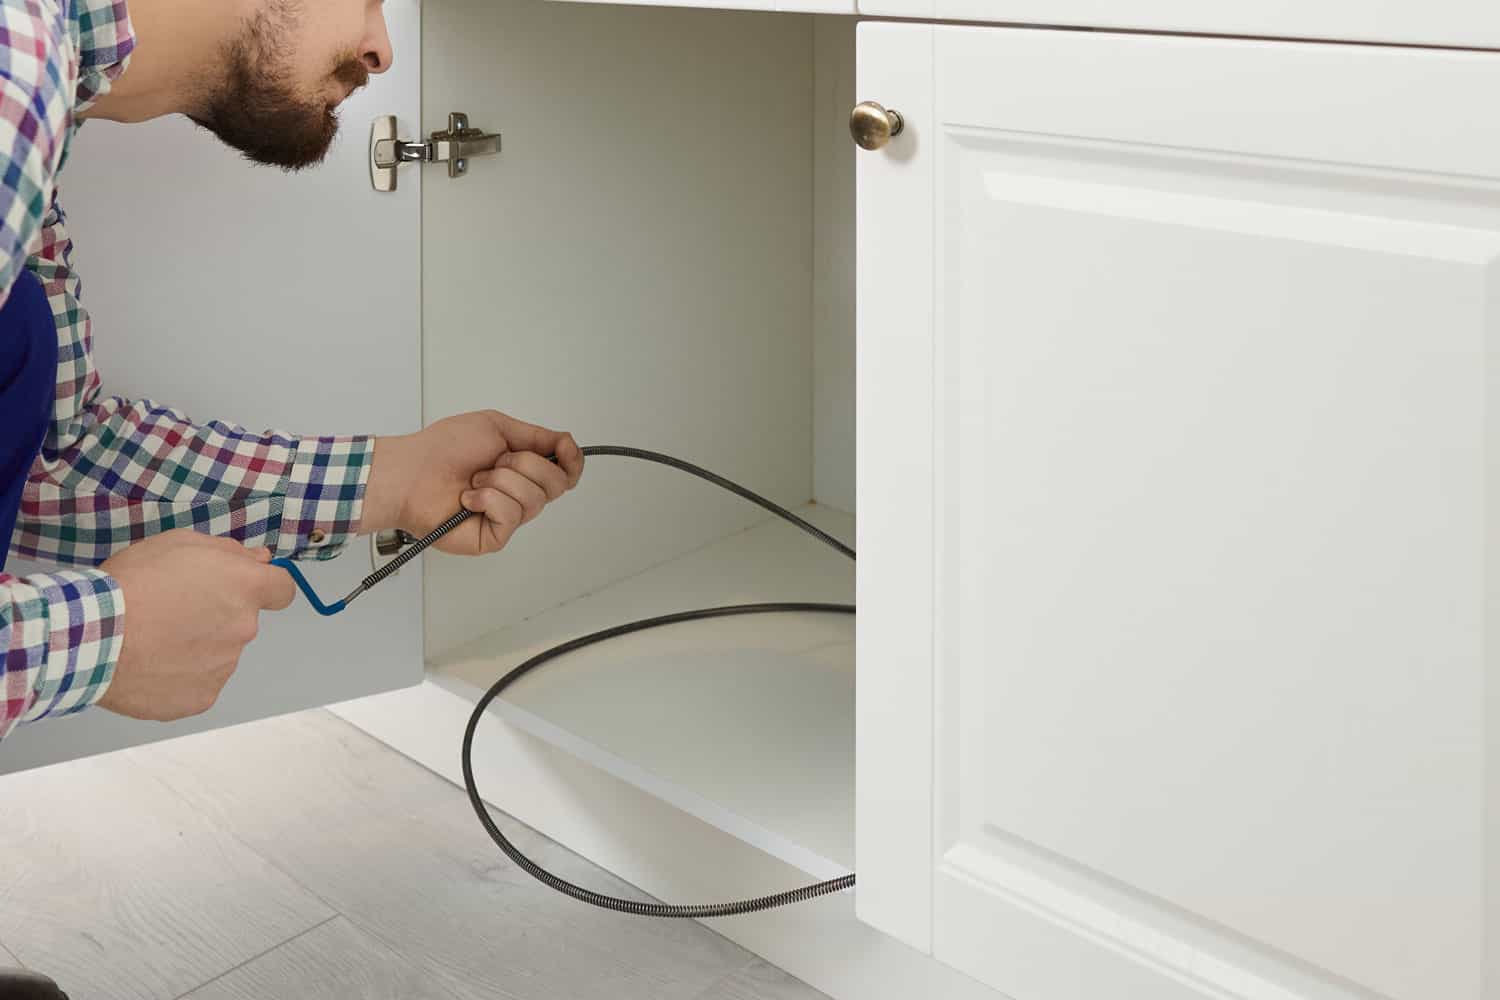 Plumber using drain snake to the kitchen sink